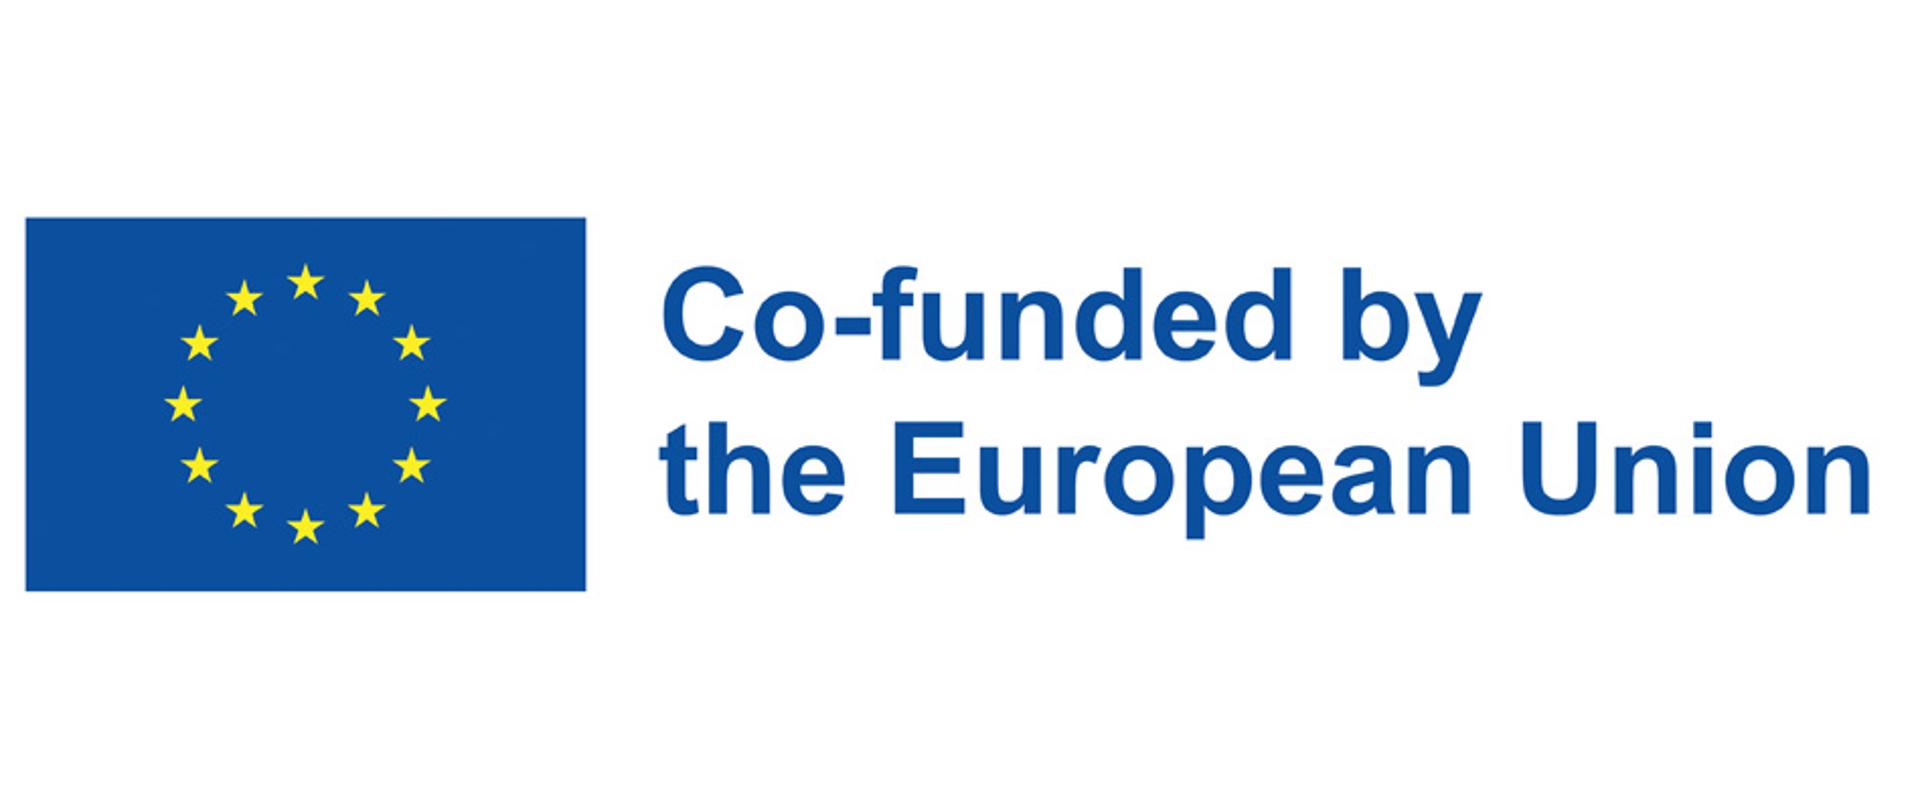 Co-funded by the European Union plus UE flag